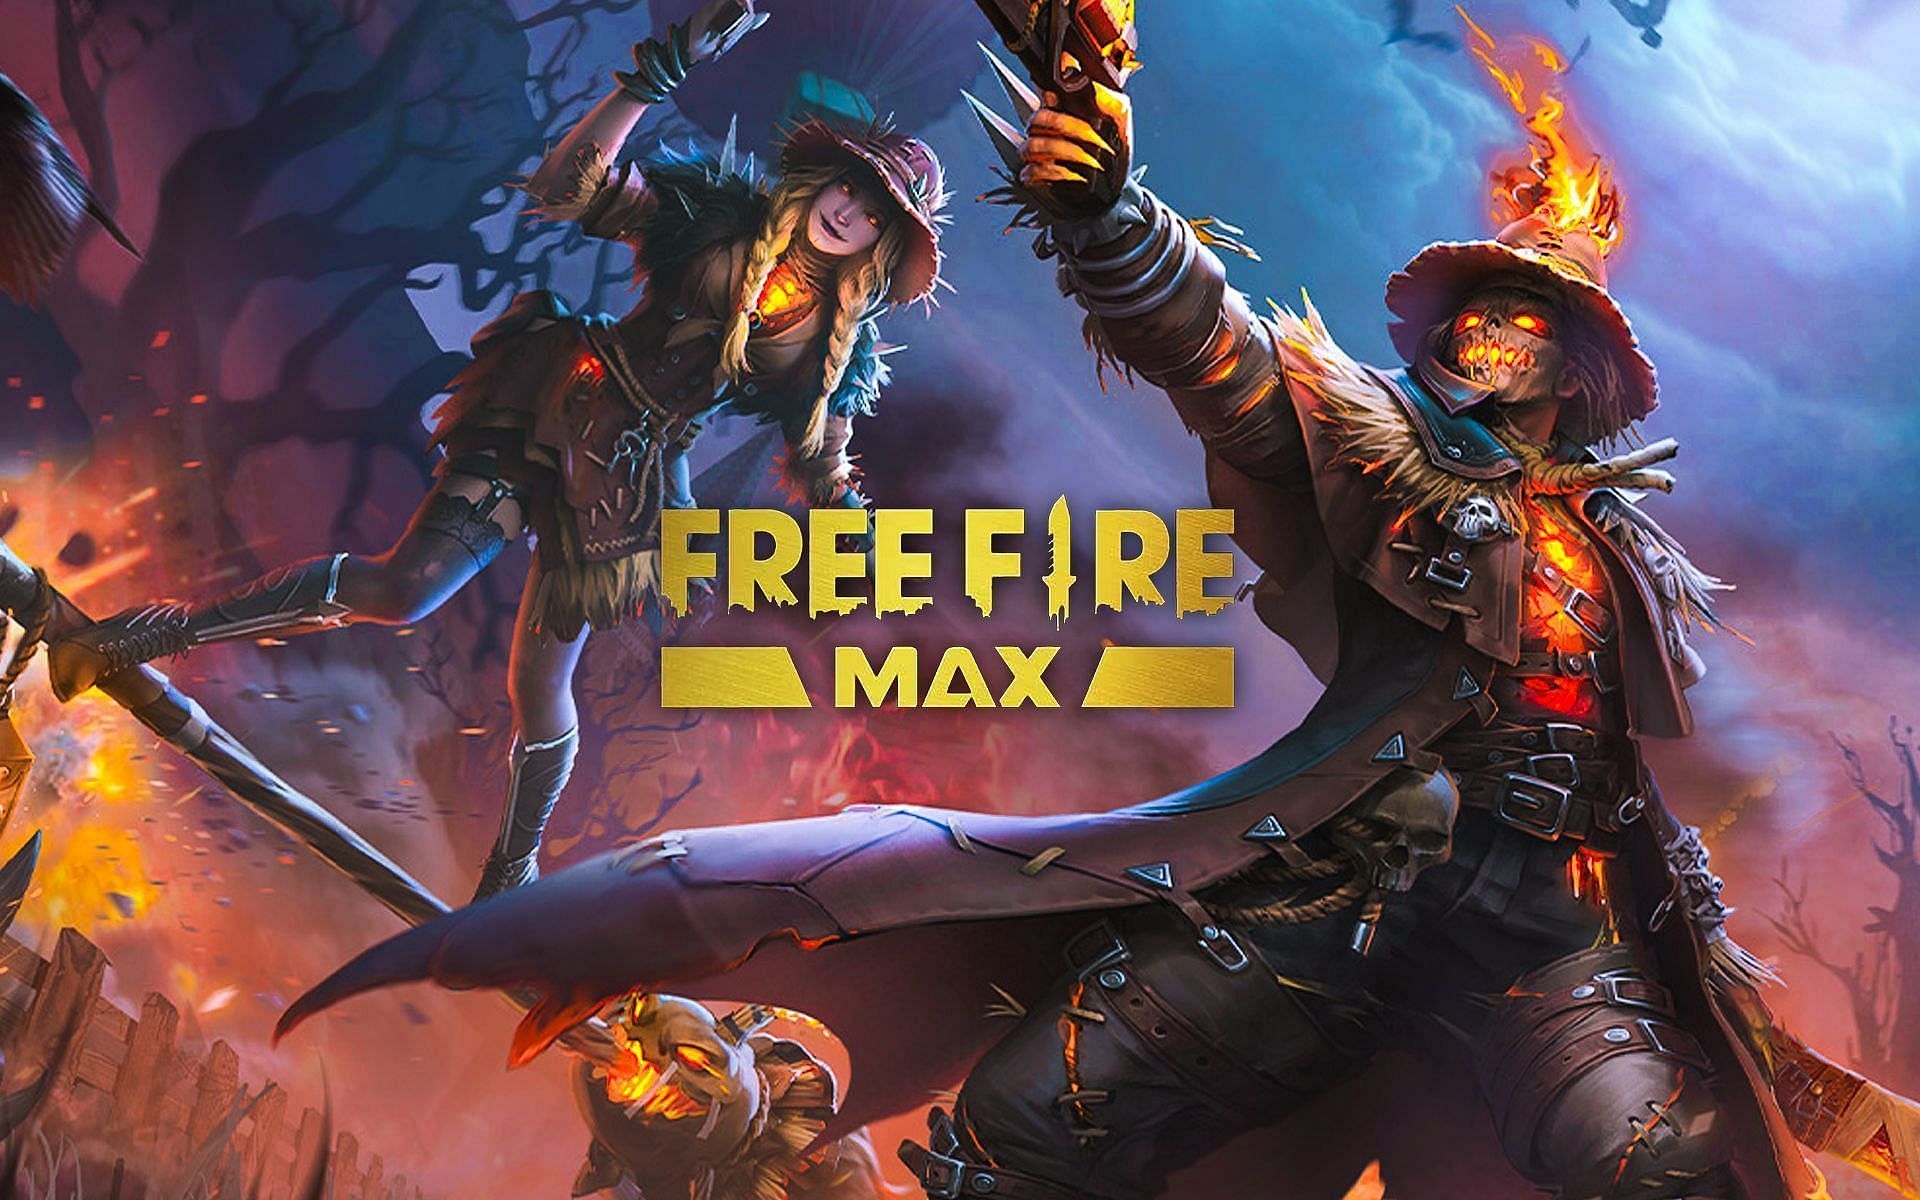 Downloading Free Fire MAX OB34 on Android and iOS (Image via Garena)